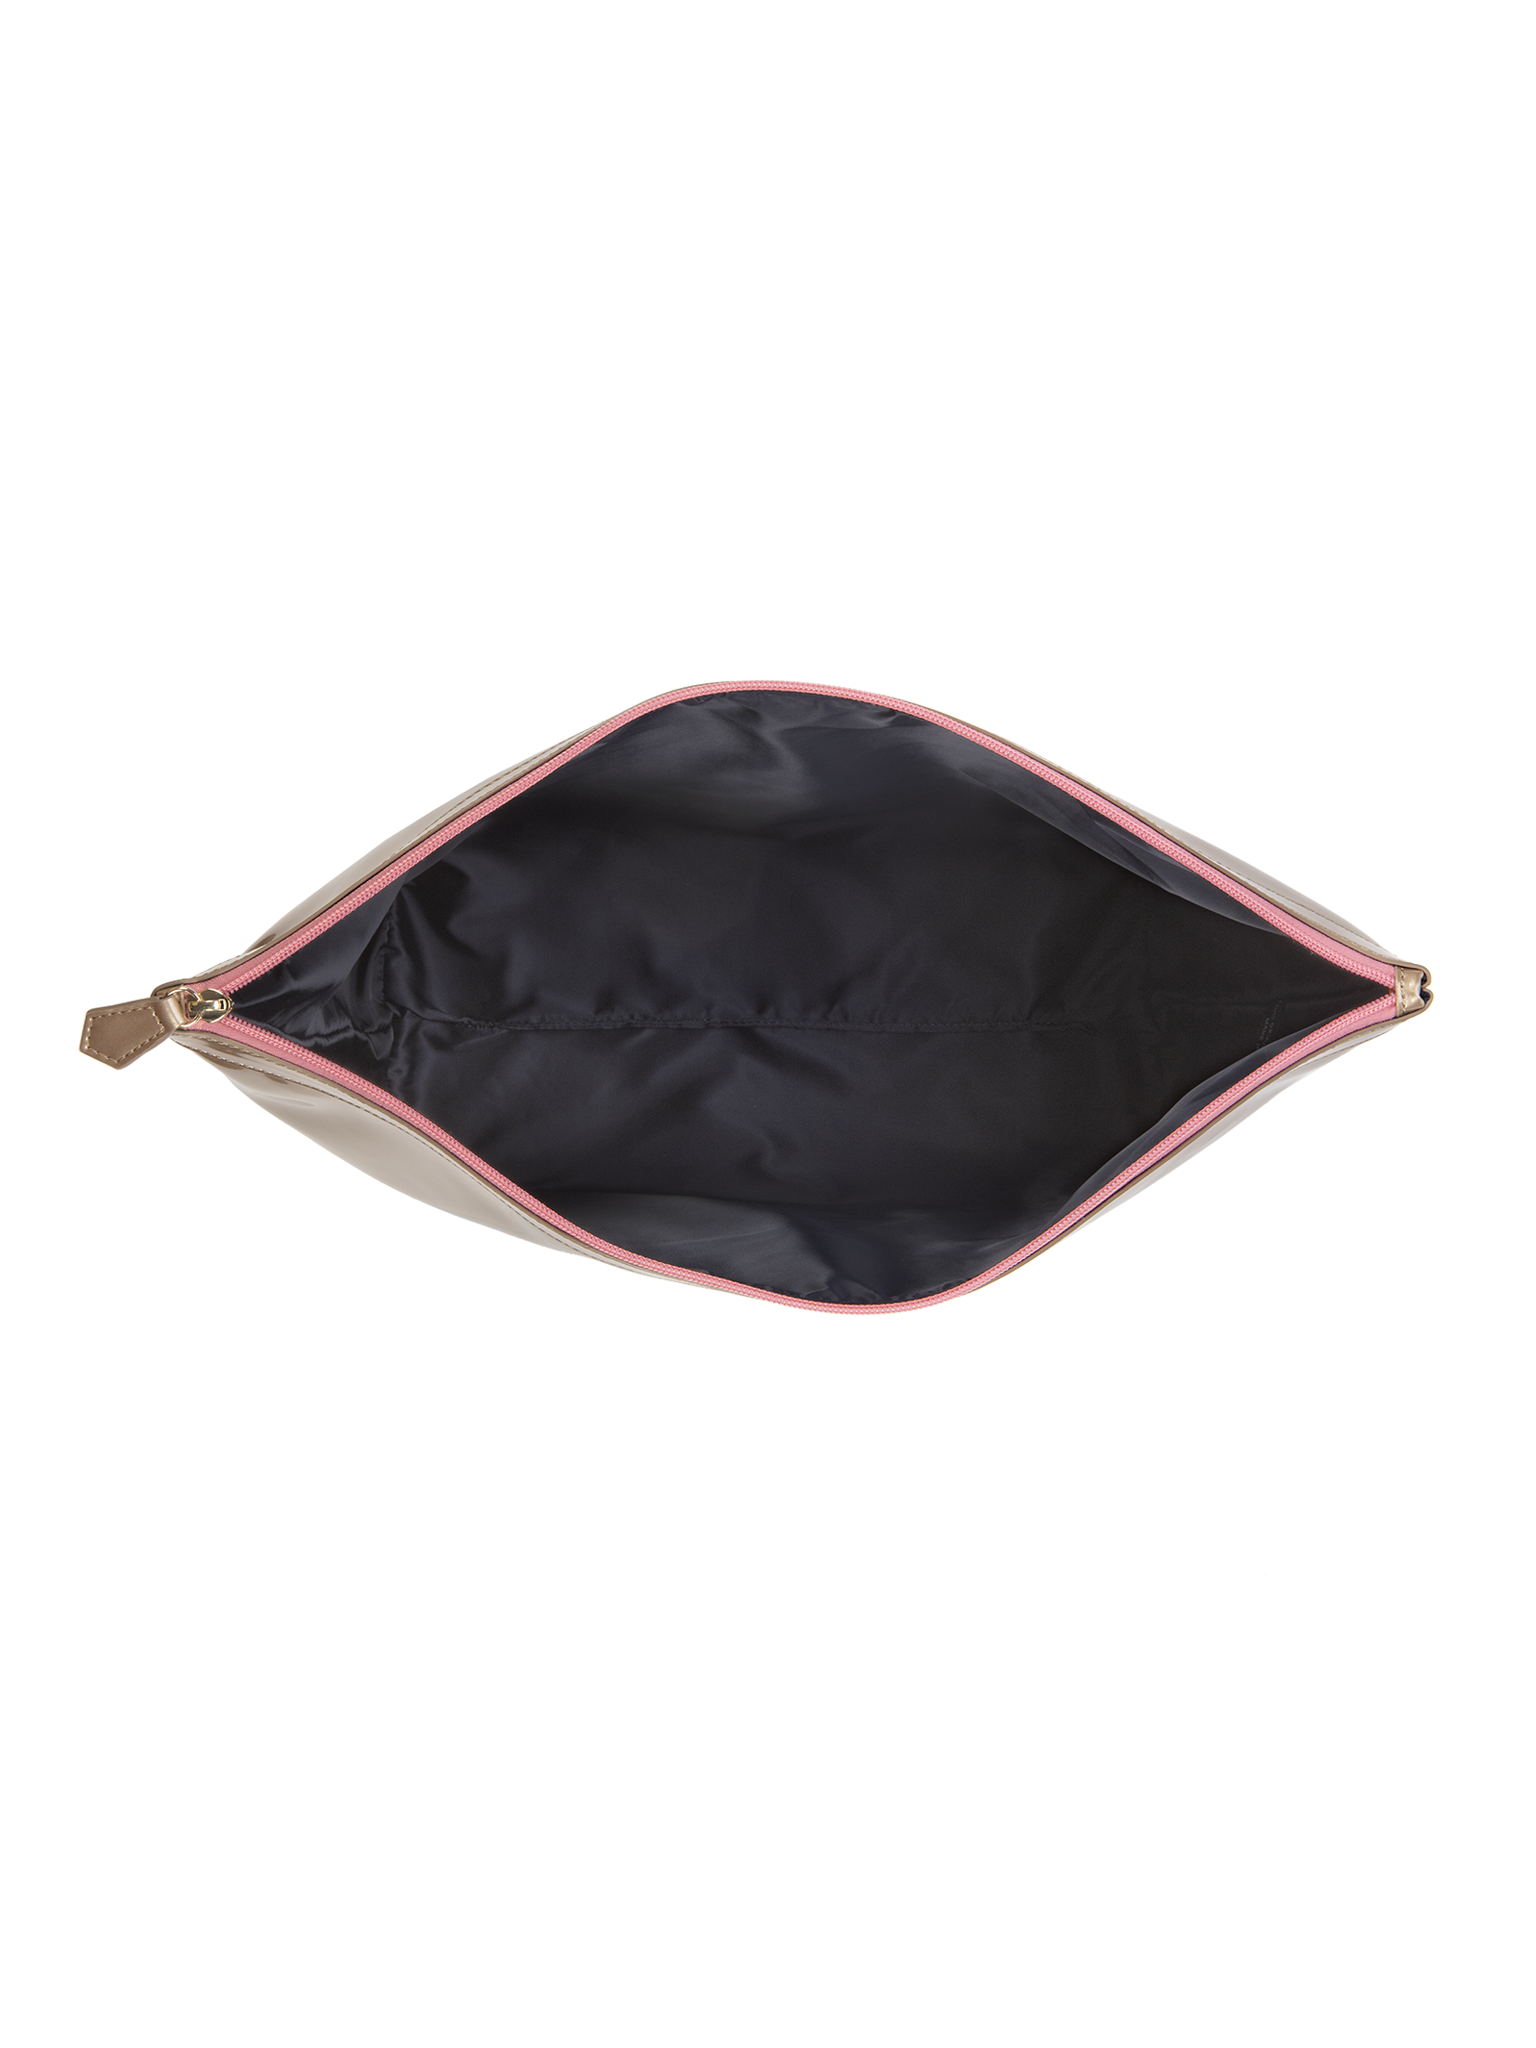 Designed with water resistant material, keep your items protected from the sun, sea and sand inside the large vegan leather pouch in champagne gold color 